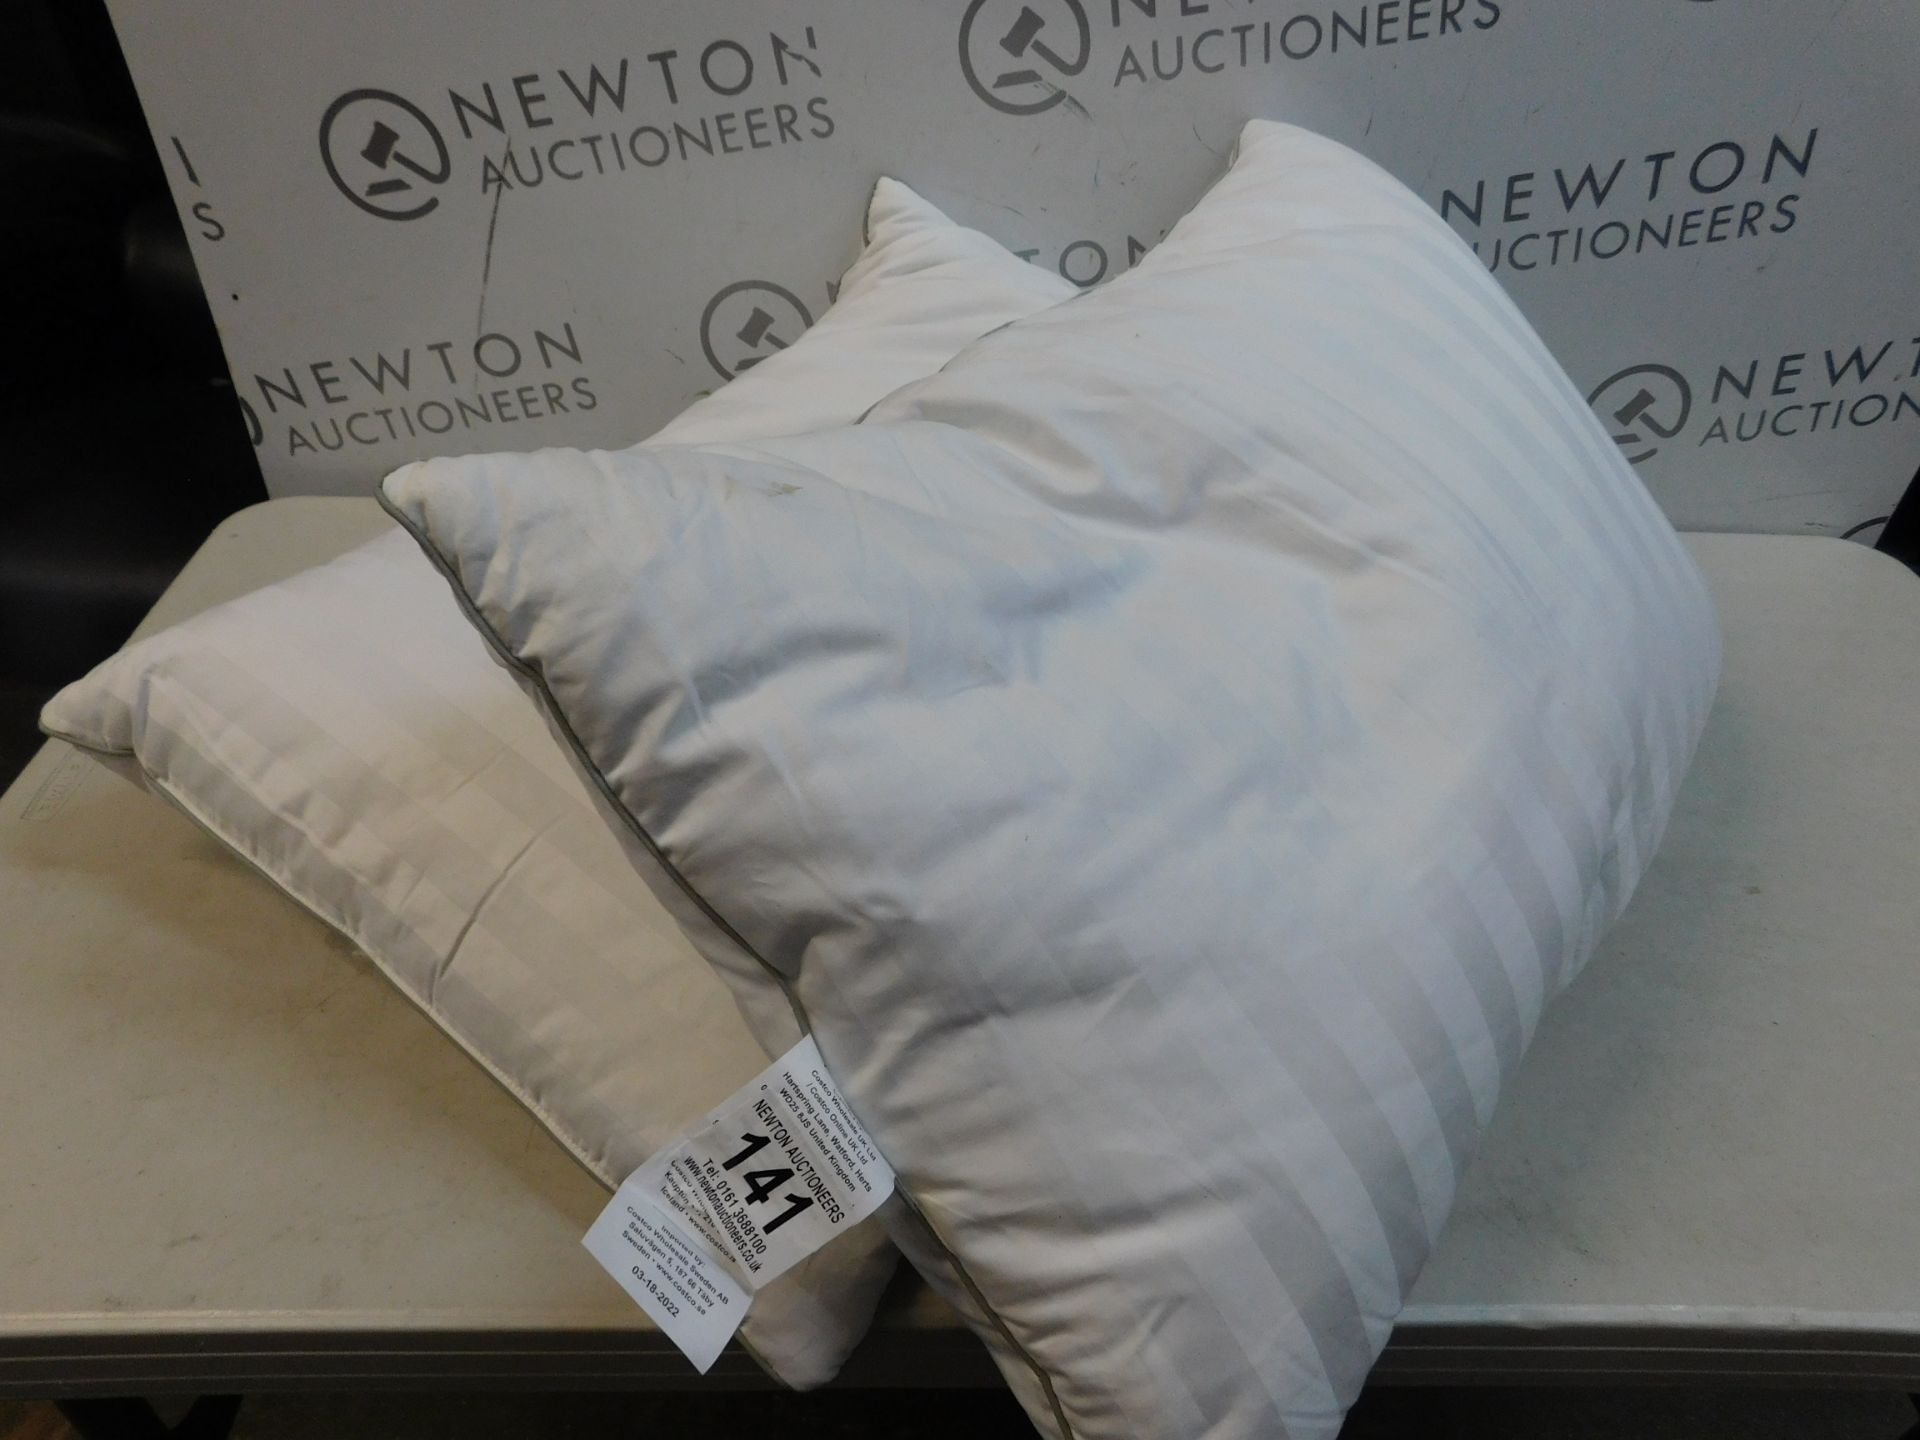 1 PAIR OF HOTEL GRAND DOUBLE TOP GOOSE FEATHER & GOOSE DOWN PILLOWS RRP Â£19.99